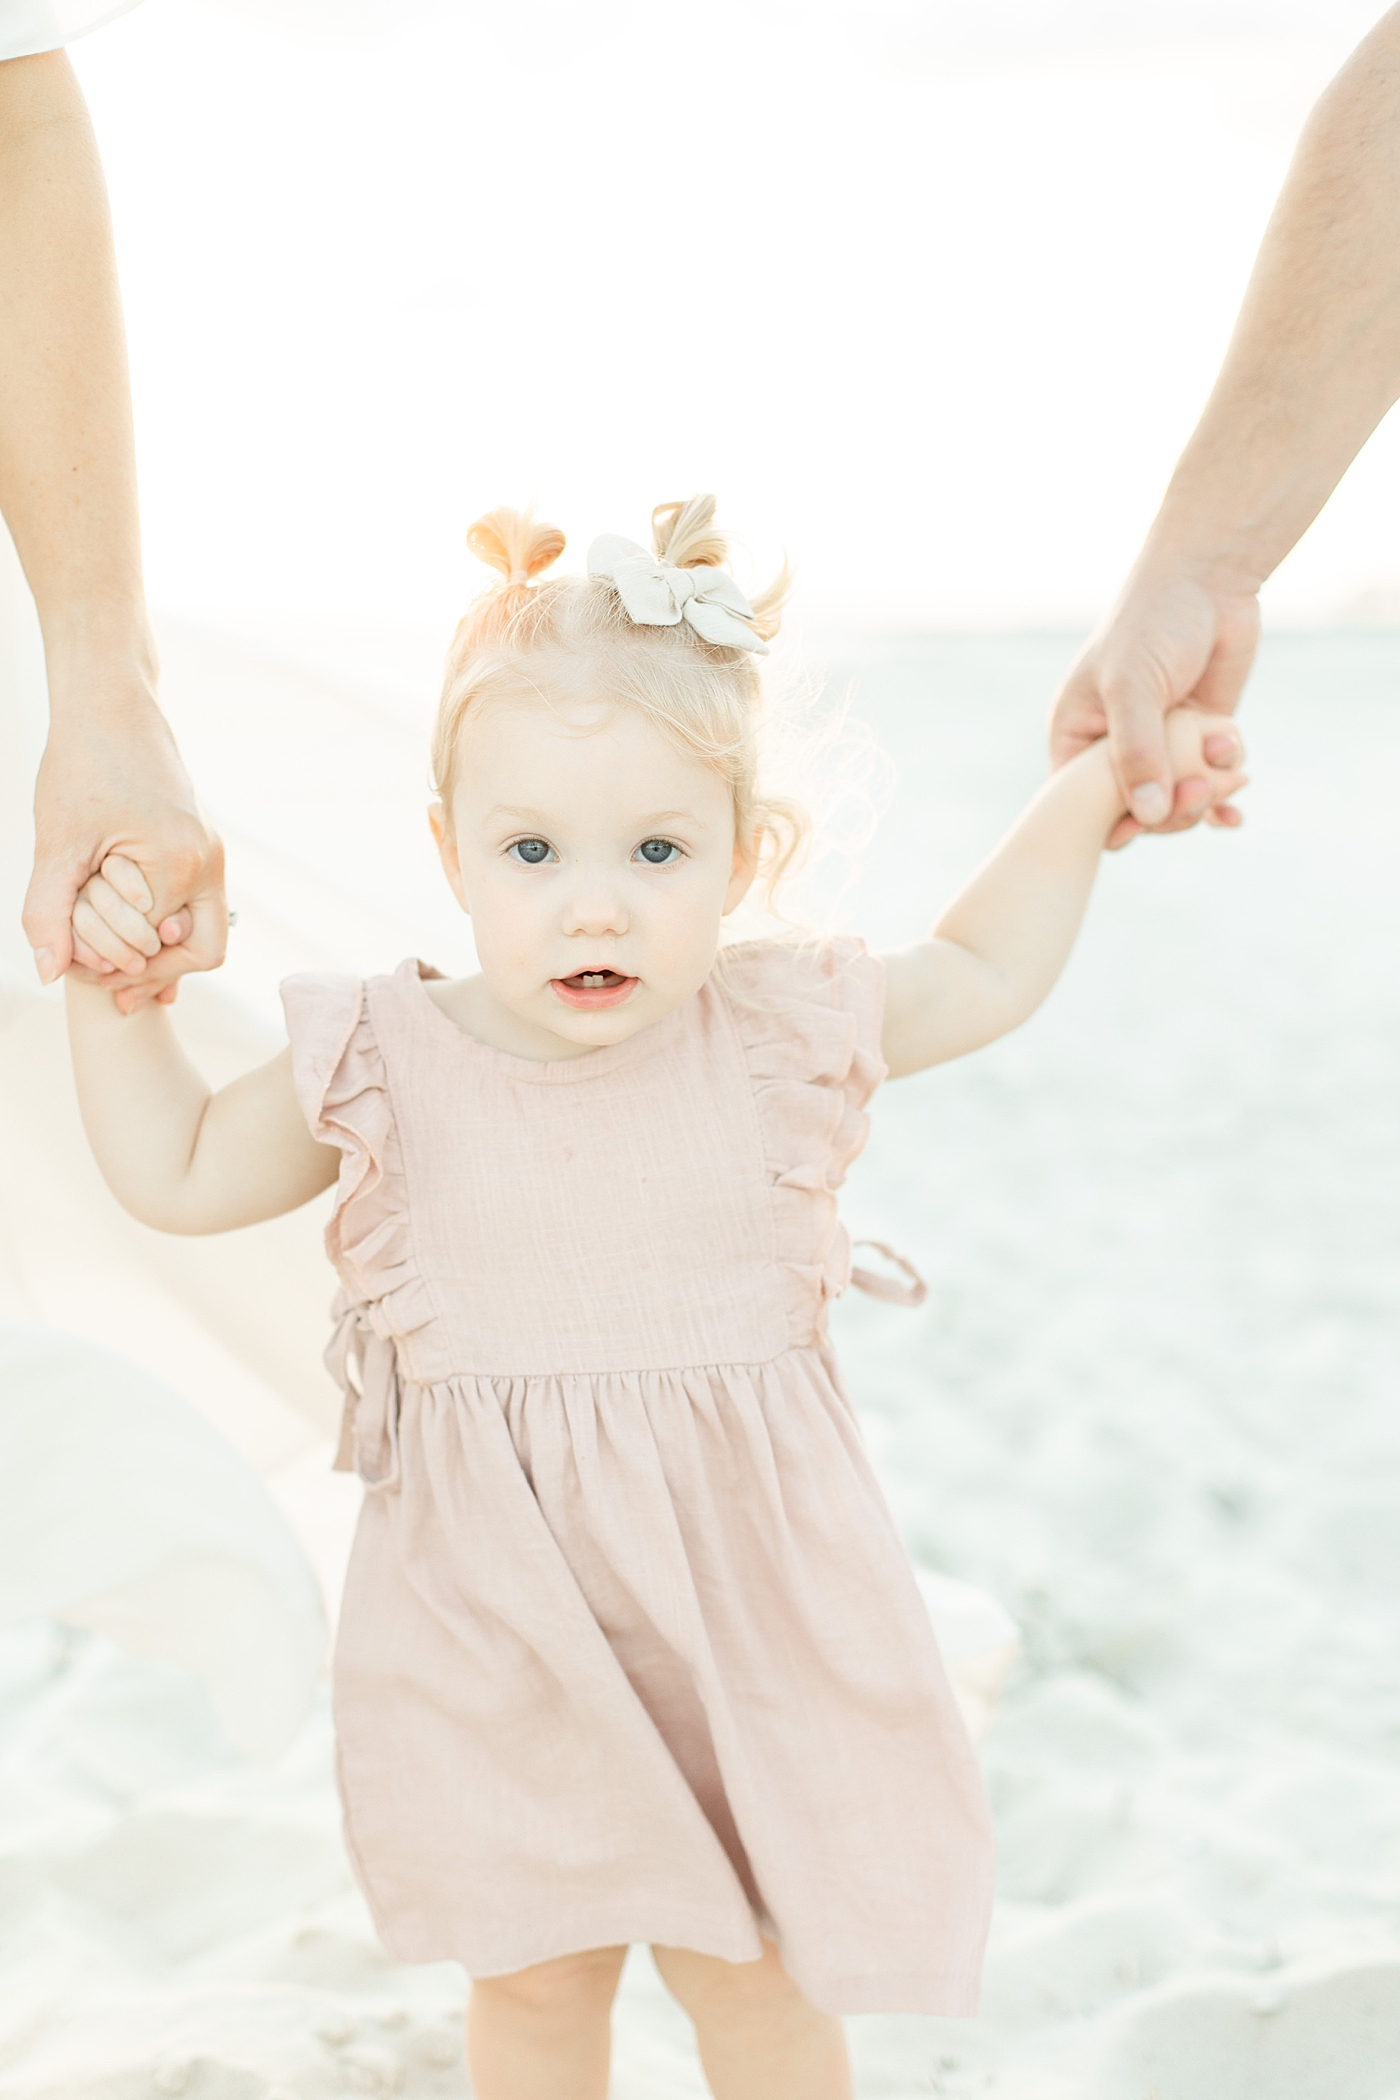 Toddler baby girl with pigtails and pink dress | Photo by Bay St. Louis MS Family Photographer Little Sunshine Photography